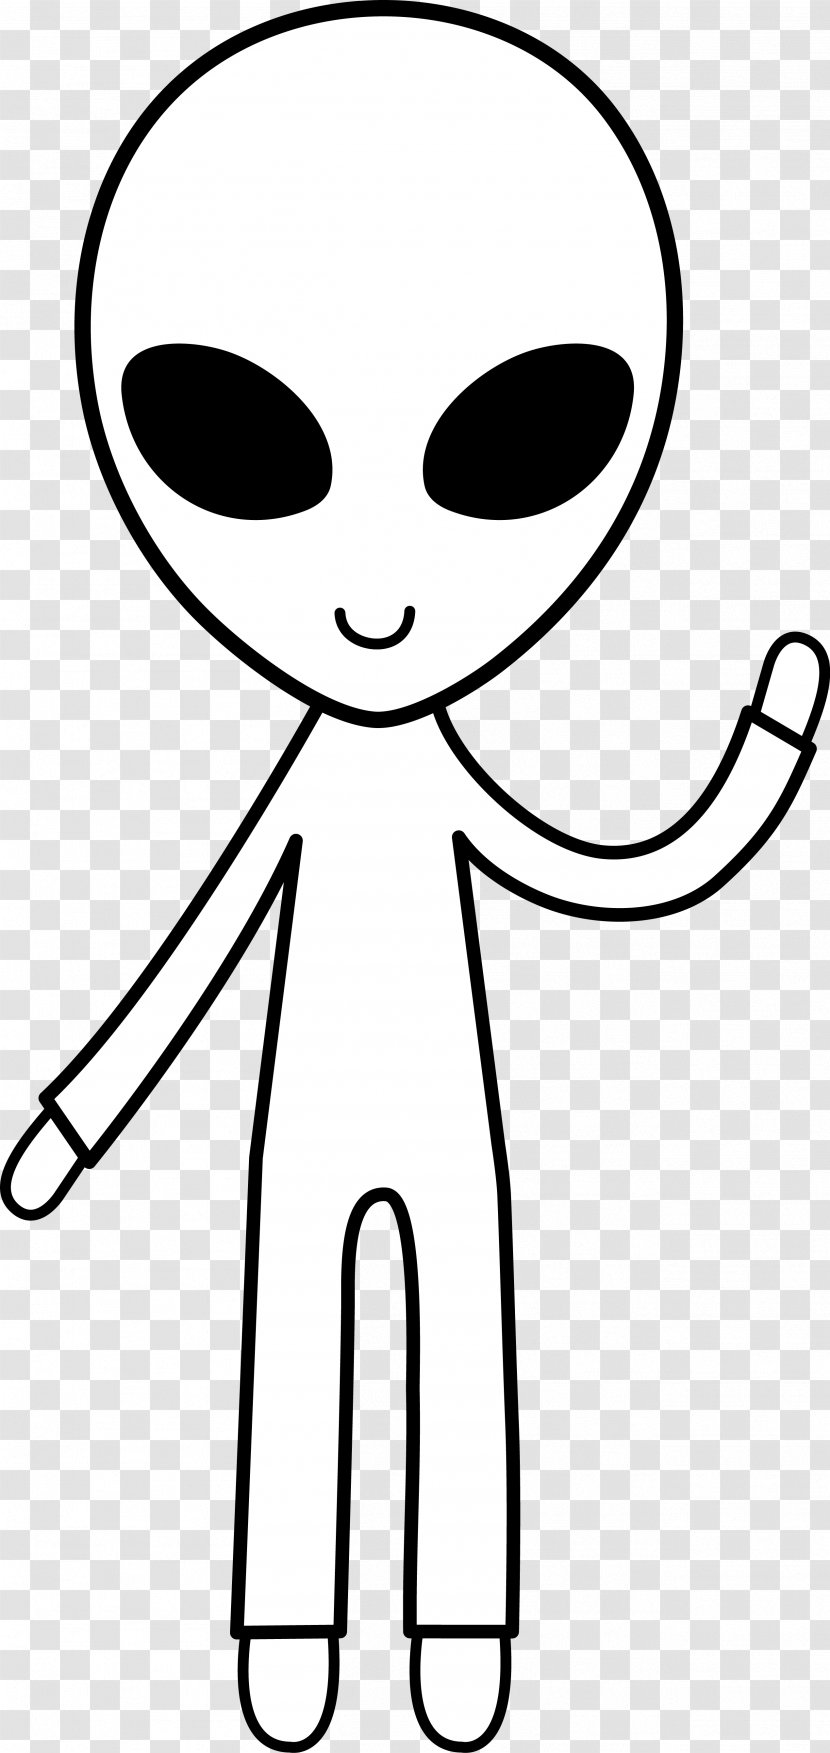 Alien Extraterrestrial Life Black And White Cartoon Clip Art - Aliens Cliparts Transparent PNG